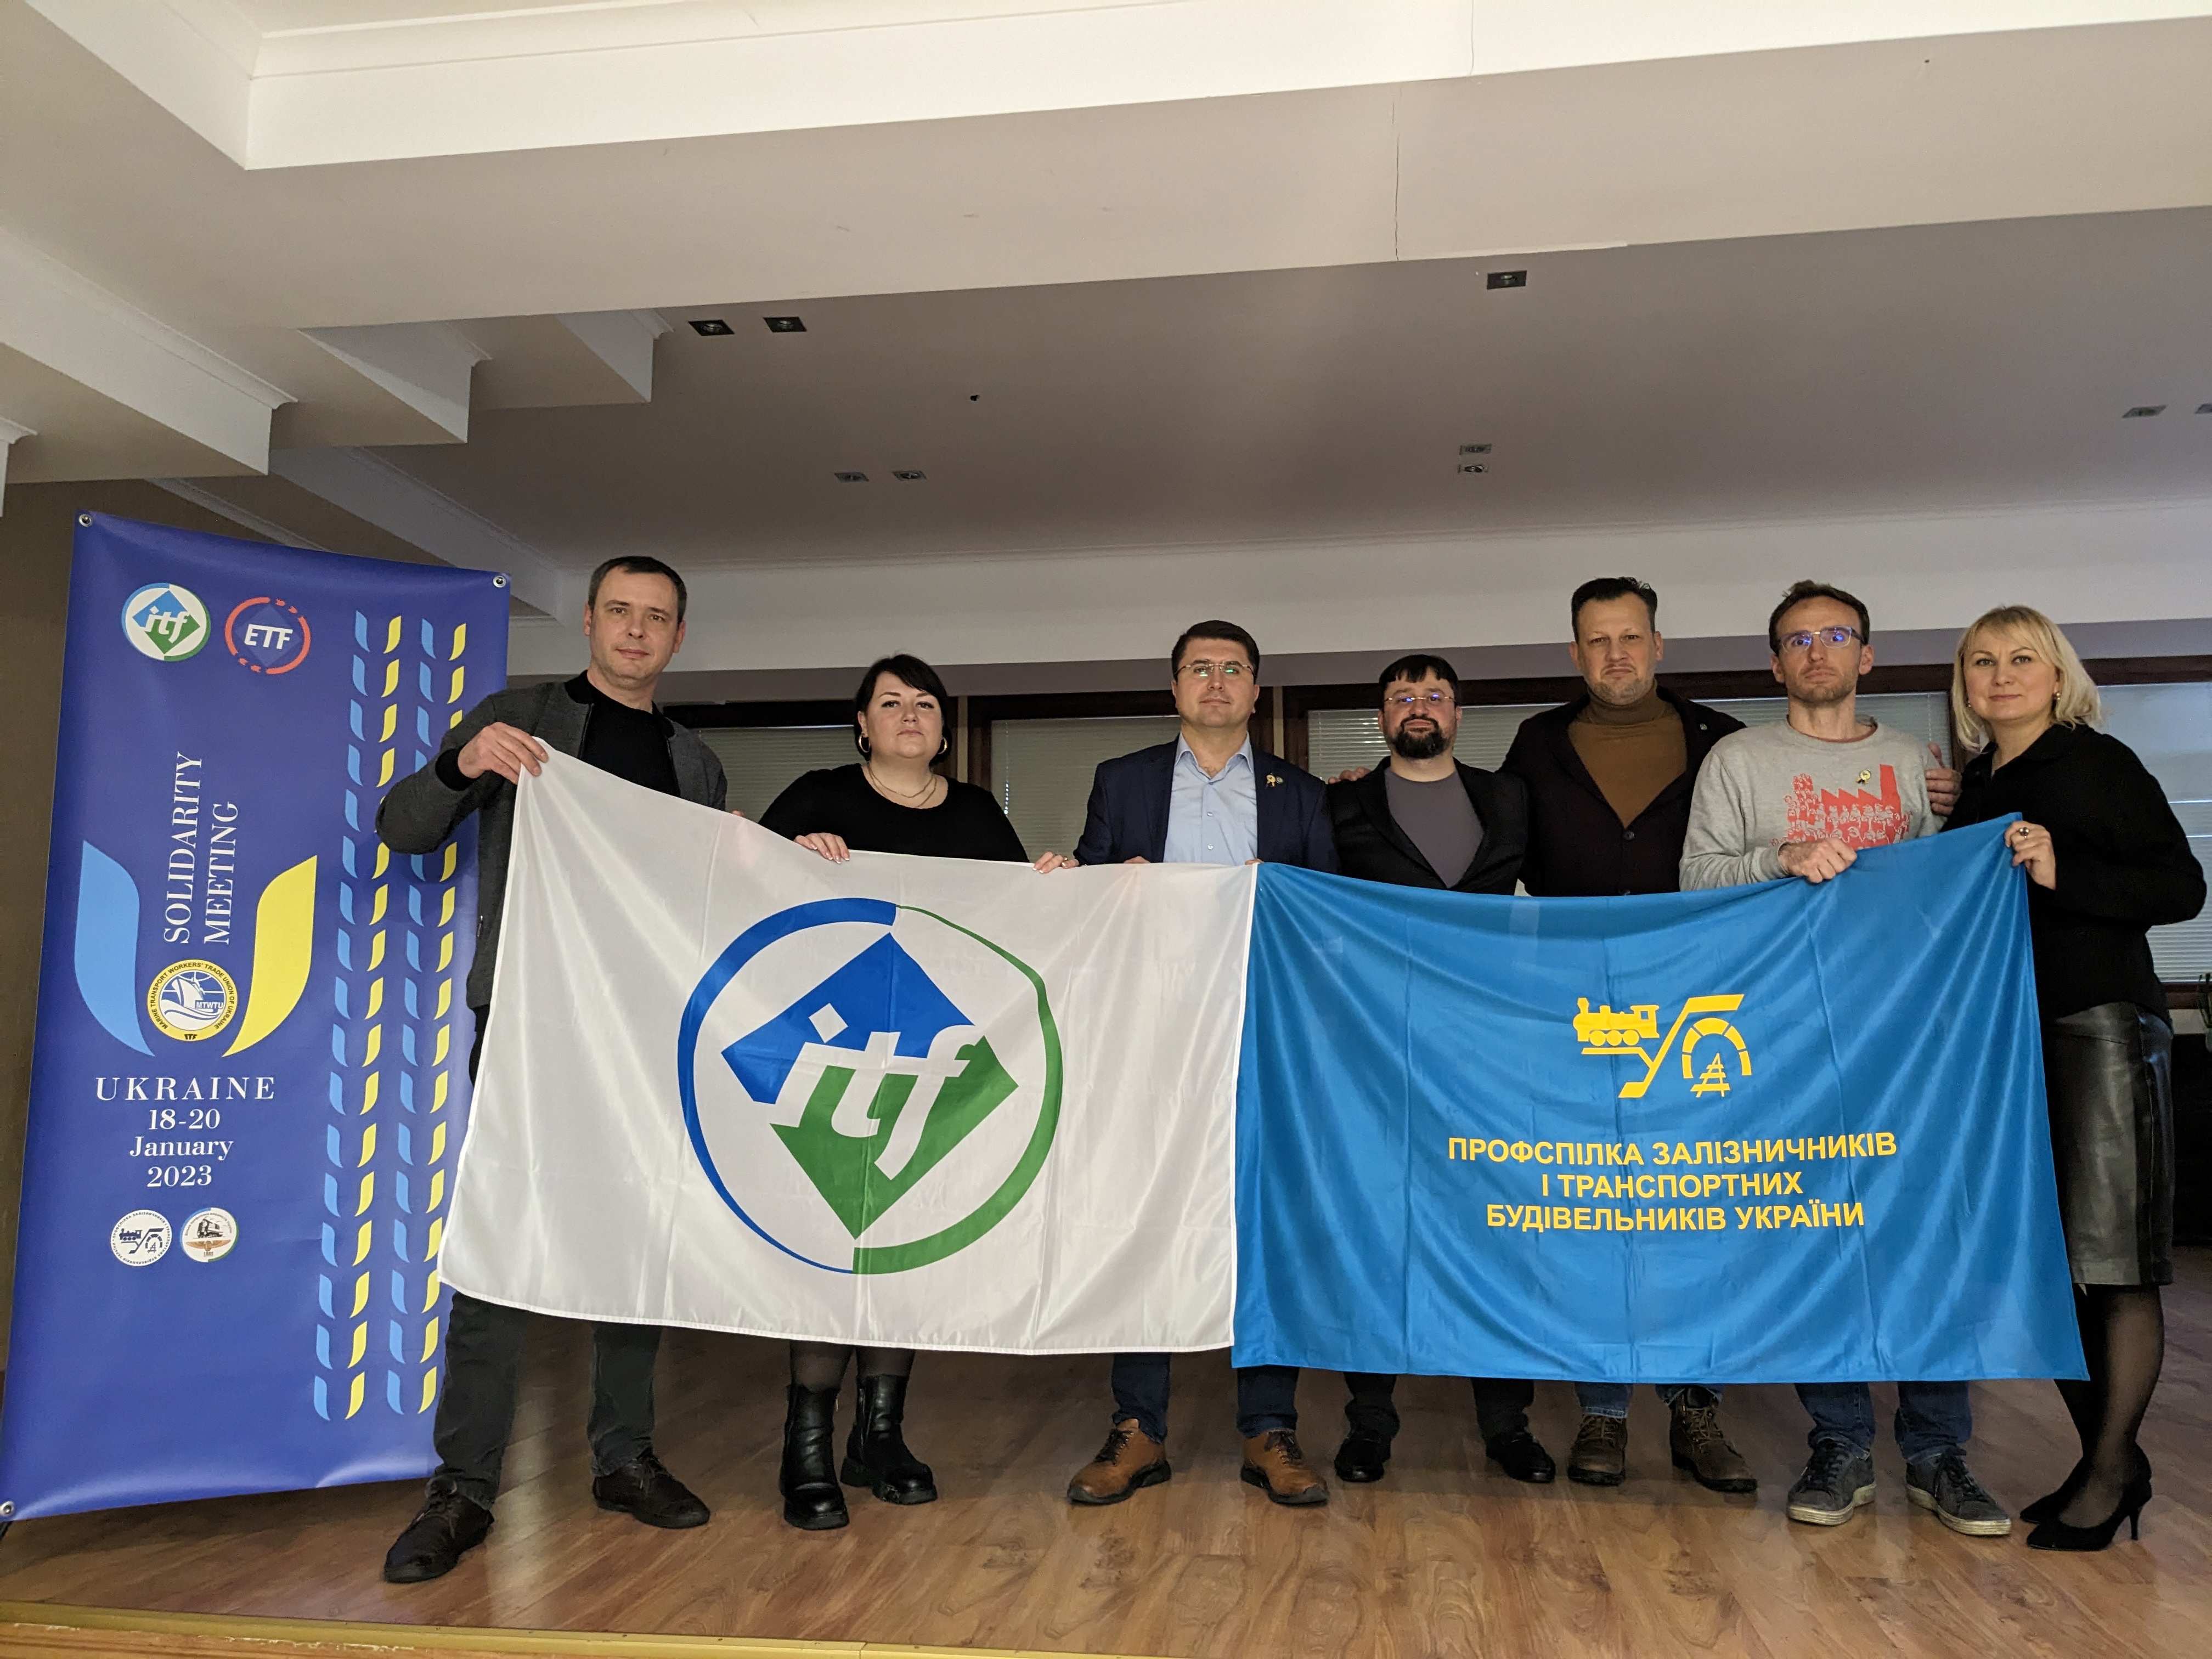 Representatives from the ITF Rail Section stand shoulder to shoulder with railway workers in Ukraine